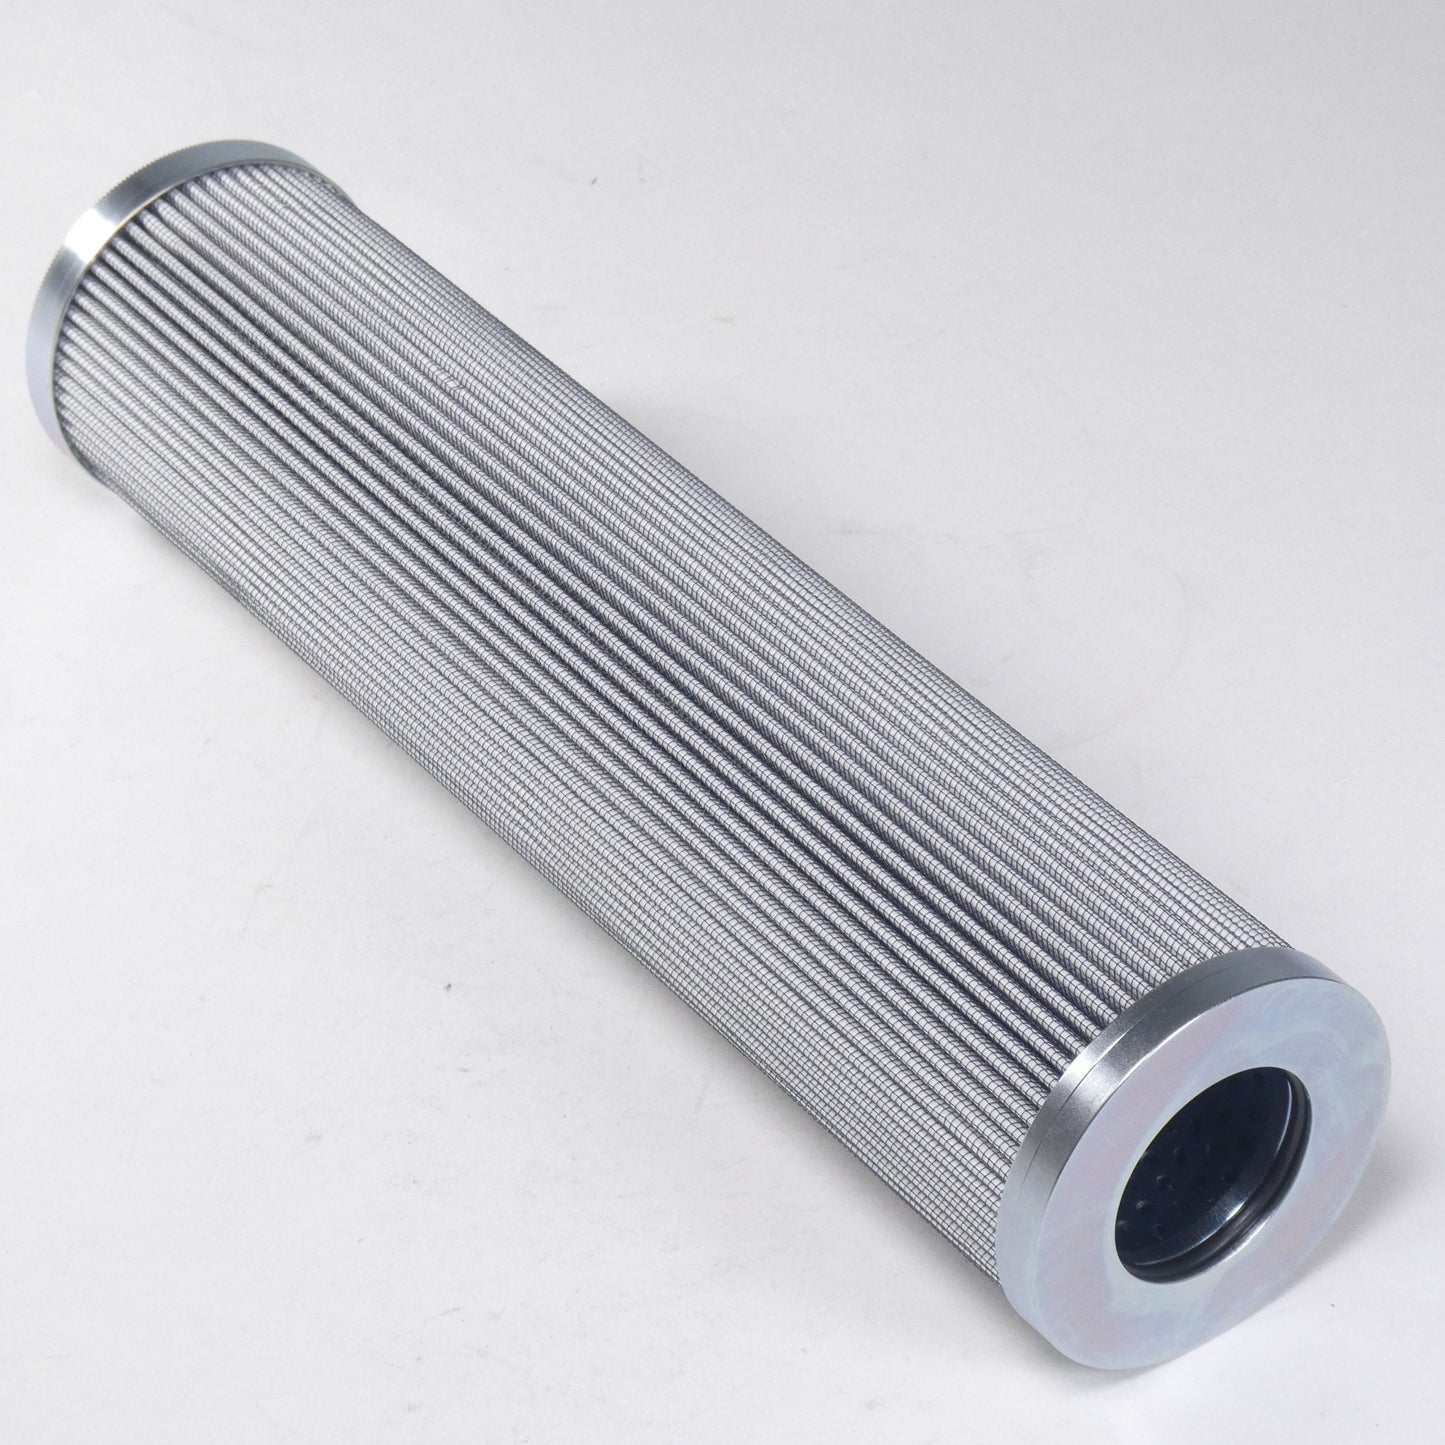 Hydrafil Replacement Filter Element for Pall AC9601FUP13J